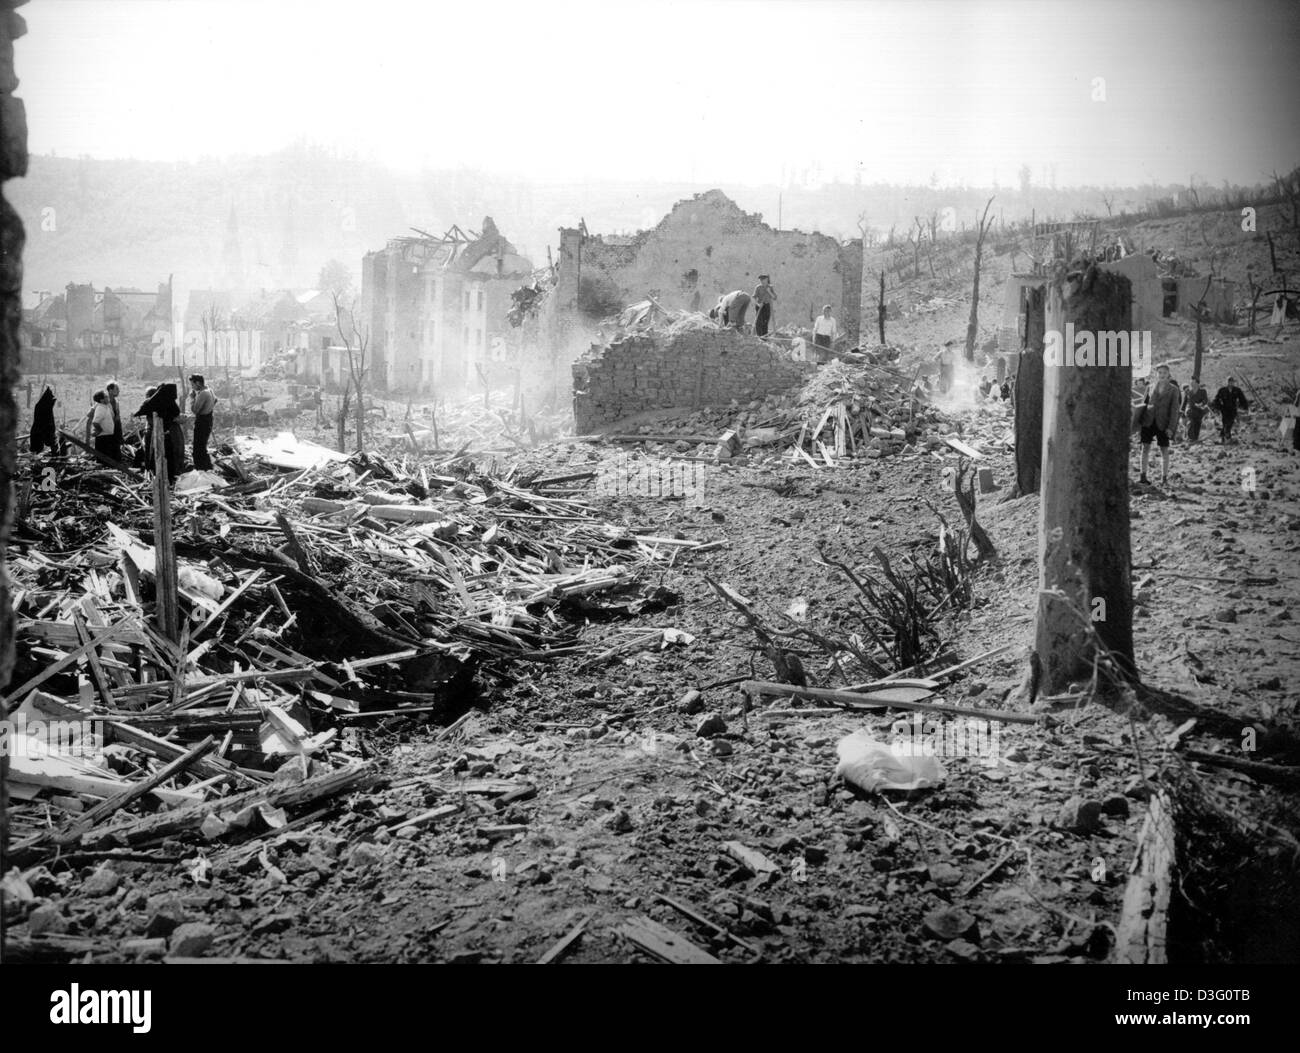 (dpa files) - Inhabitants search for usable household items in the destroyed houses in Pruem, western Germany, 15 August 1949. On 15 August 1949 more than 500 tons of ammunition, remnants of the German army in World War II, exploded in a subterranean bunker near Pruem. Large parts of the town of Pruem were destroyed. 11 people died and around 150 people were seriously injured. Stock Photo